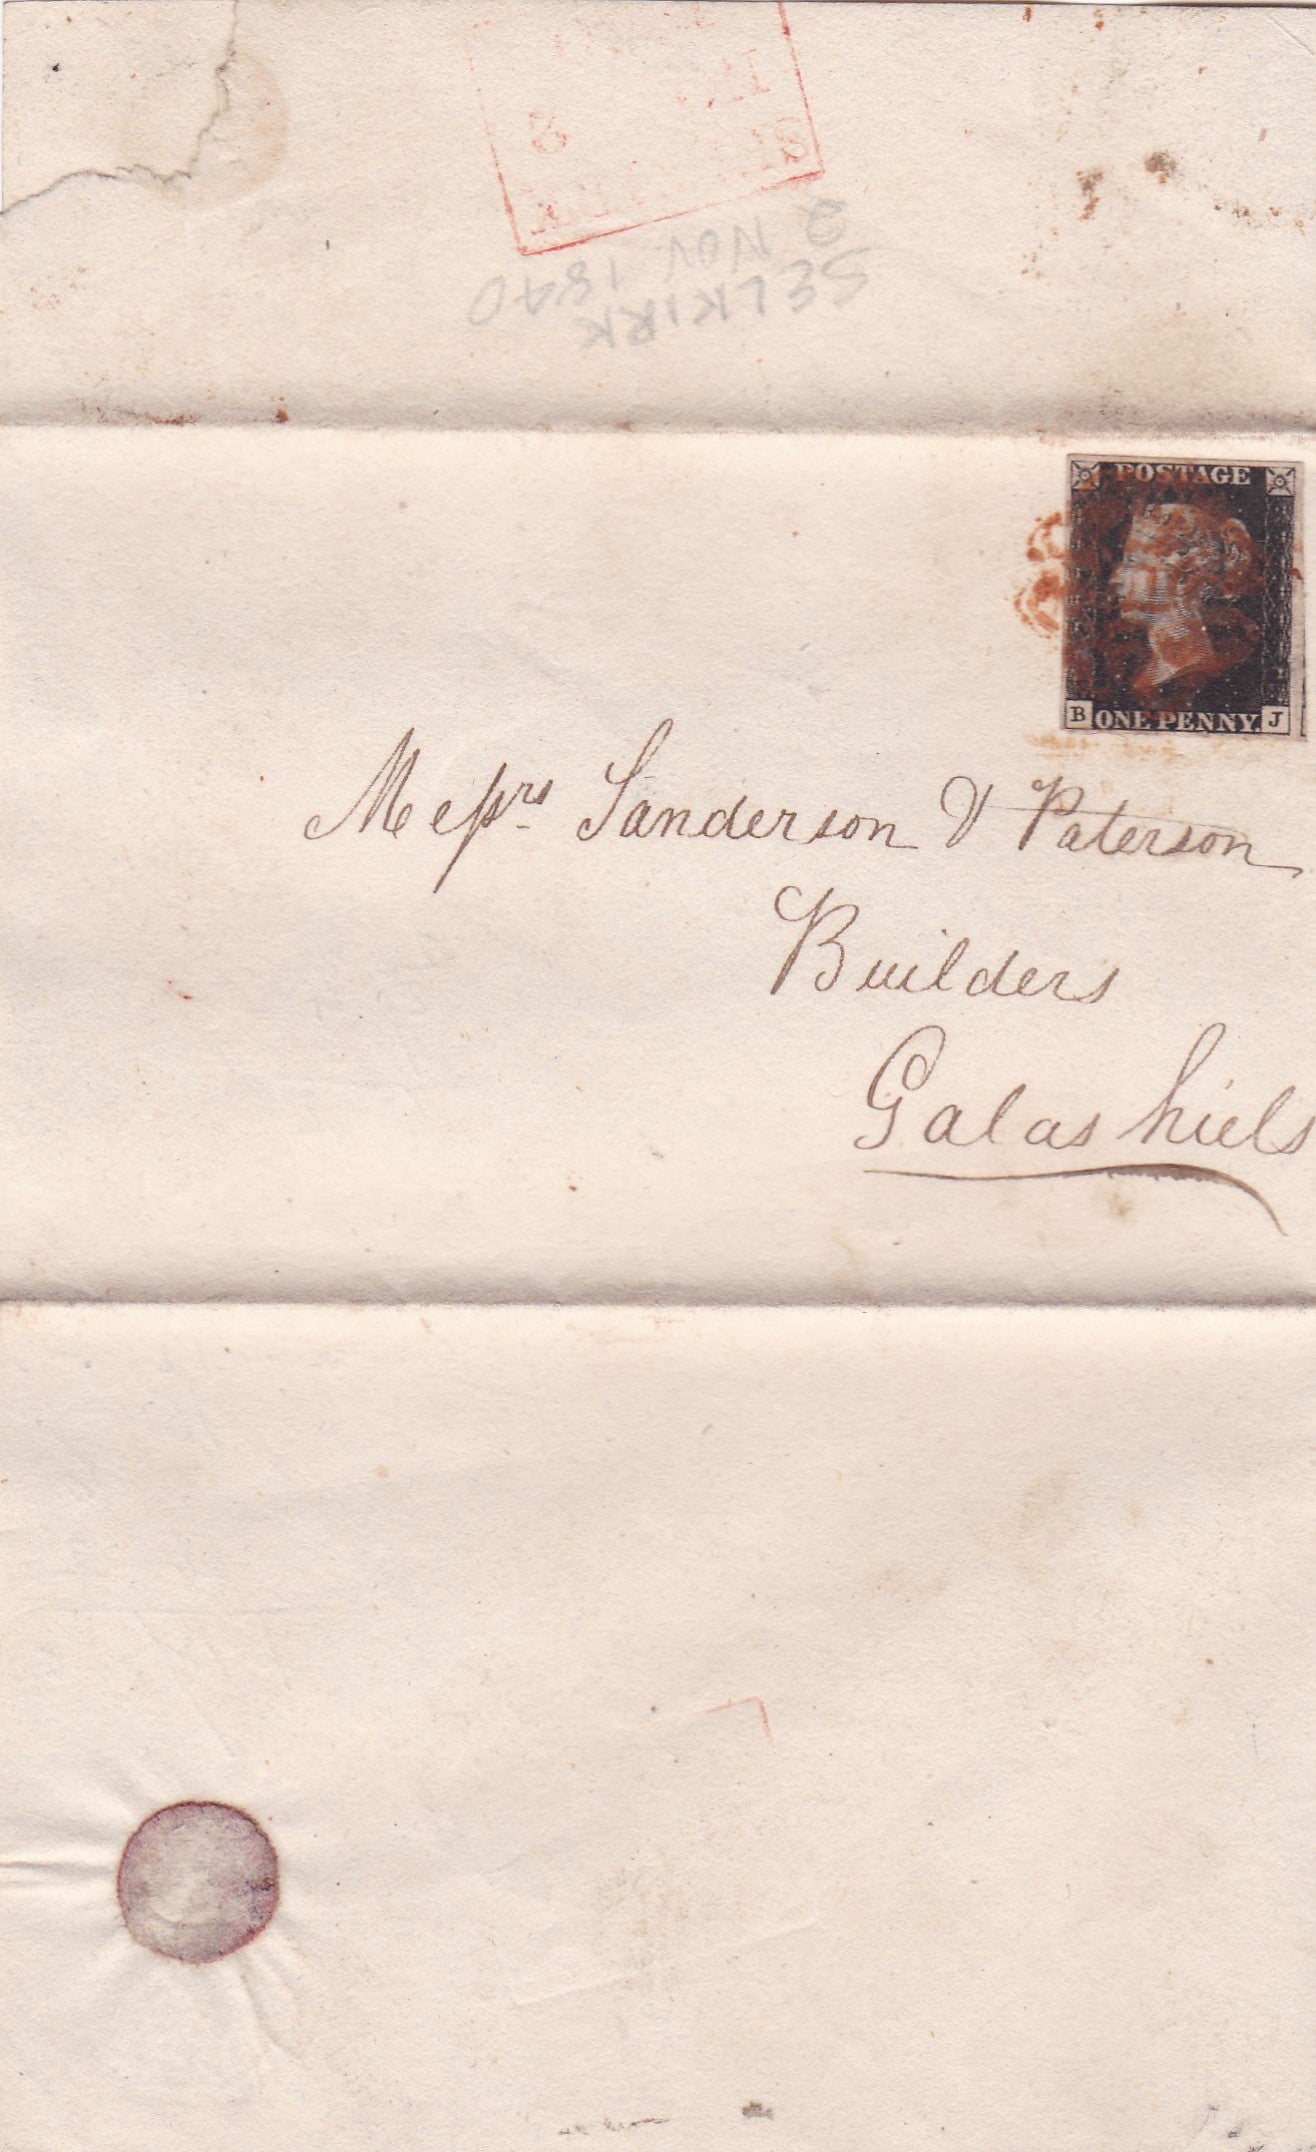 Penny Black-World's first stamp postally used on cover 2nd Nov,1840